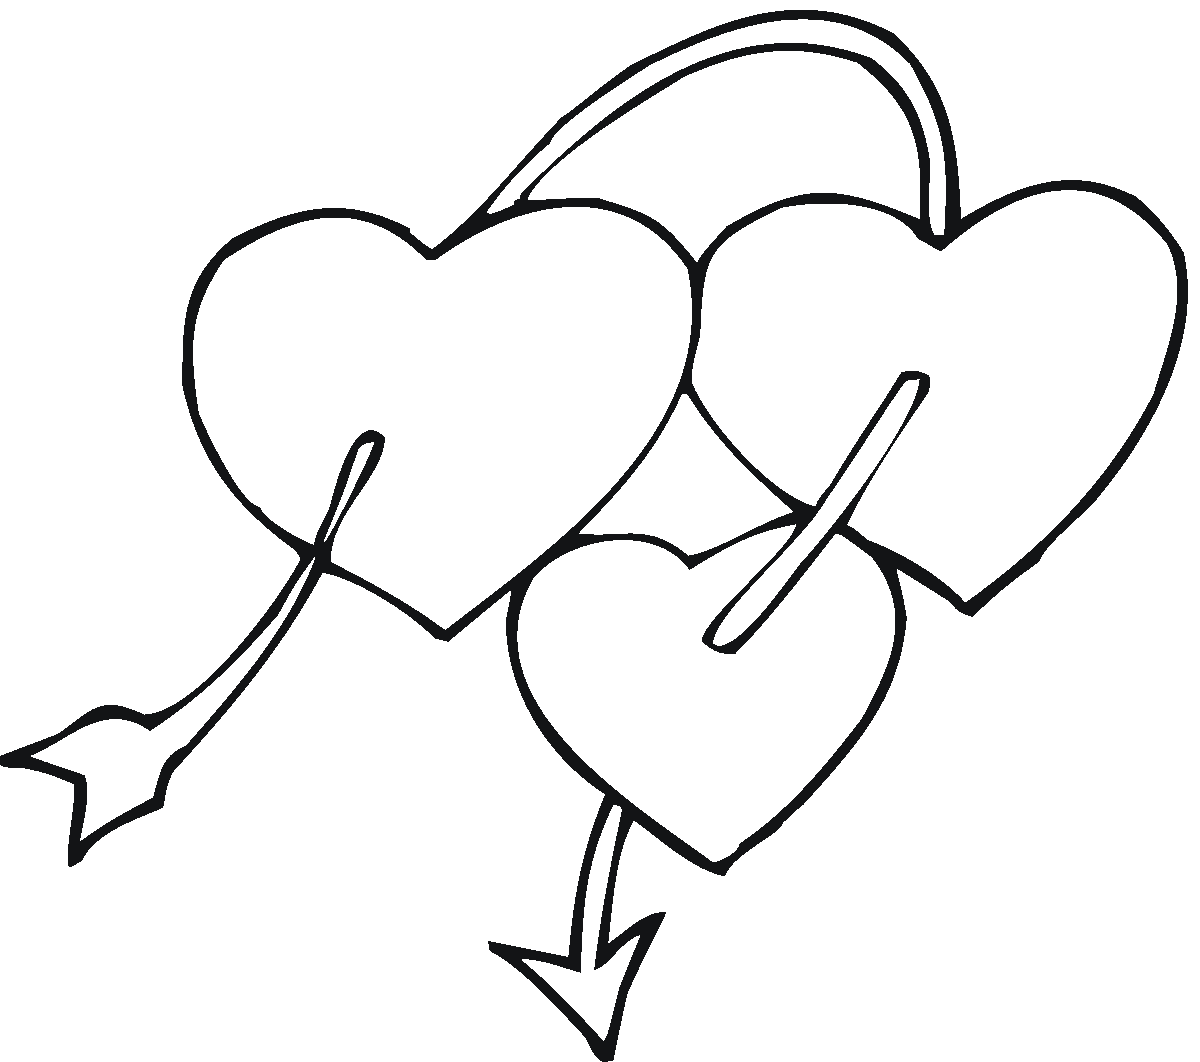 coloring pages of a heart hearts coloring pages getcoloringpagescom of heart a coloring pages 